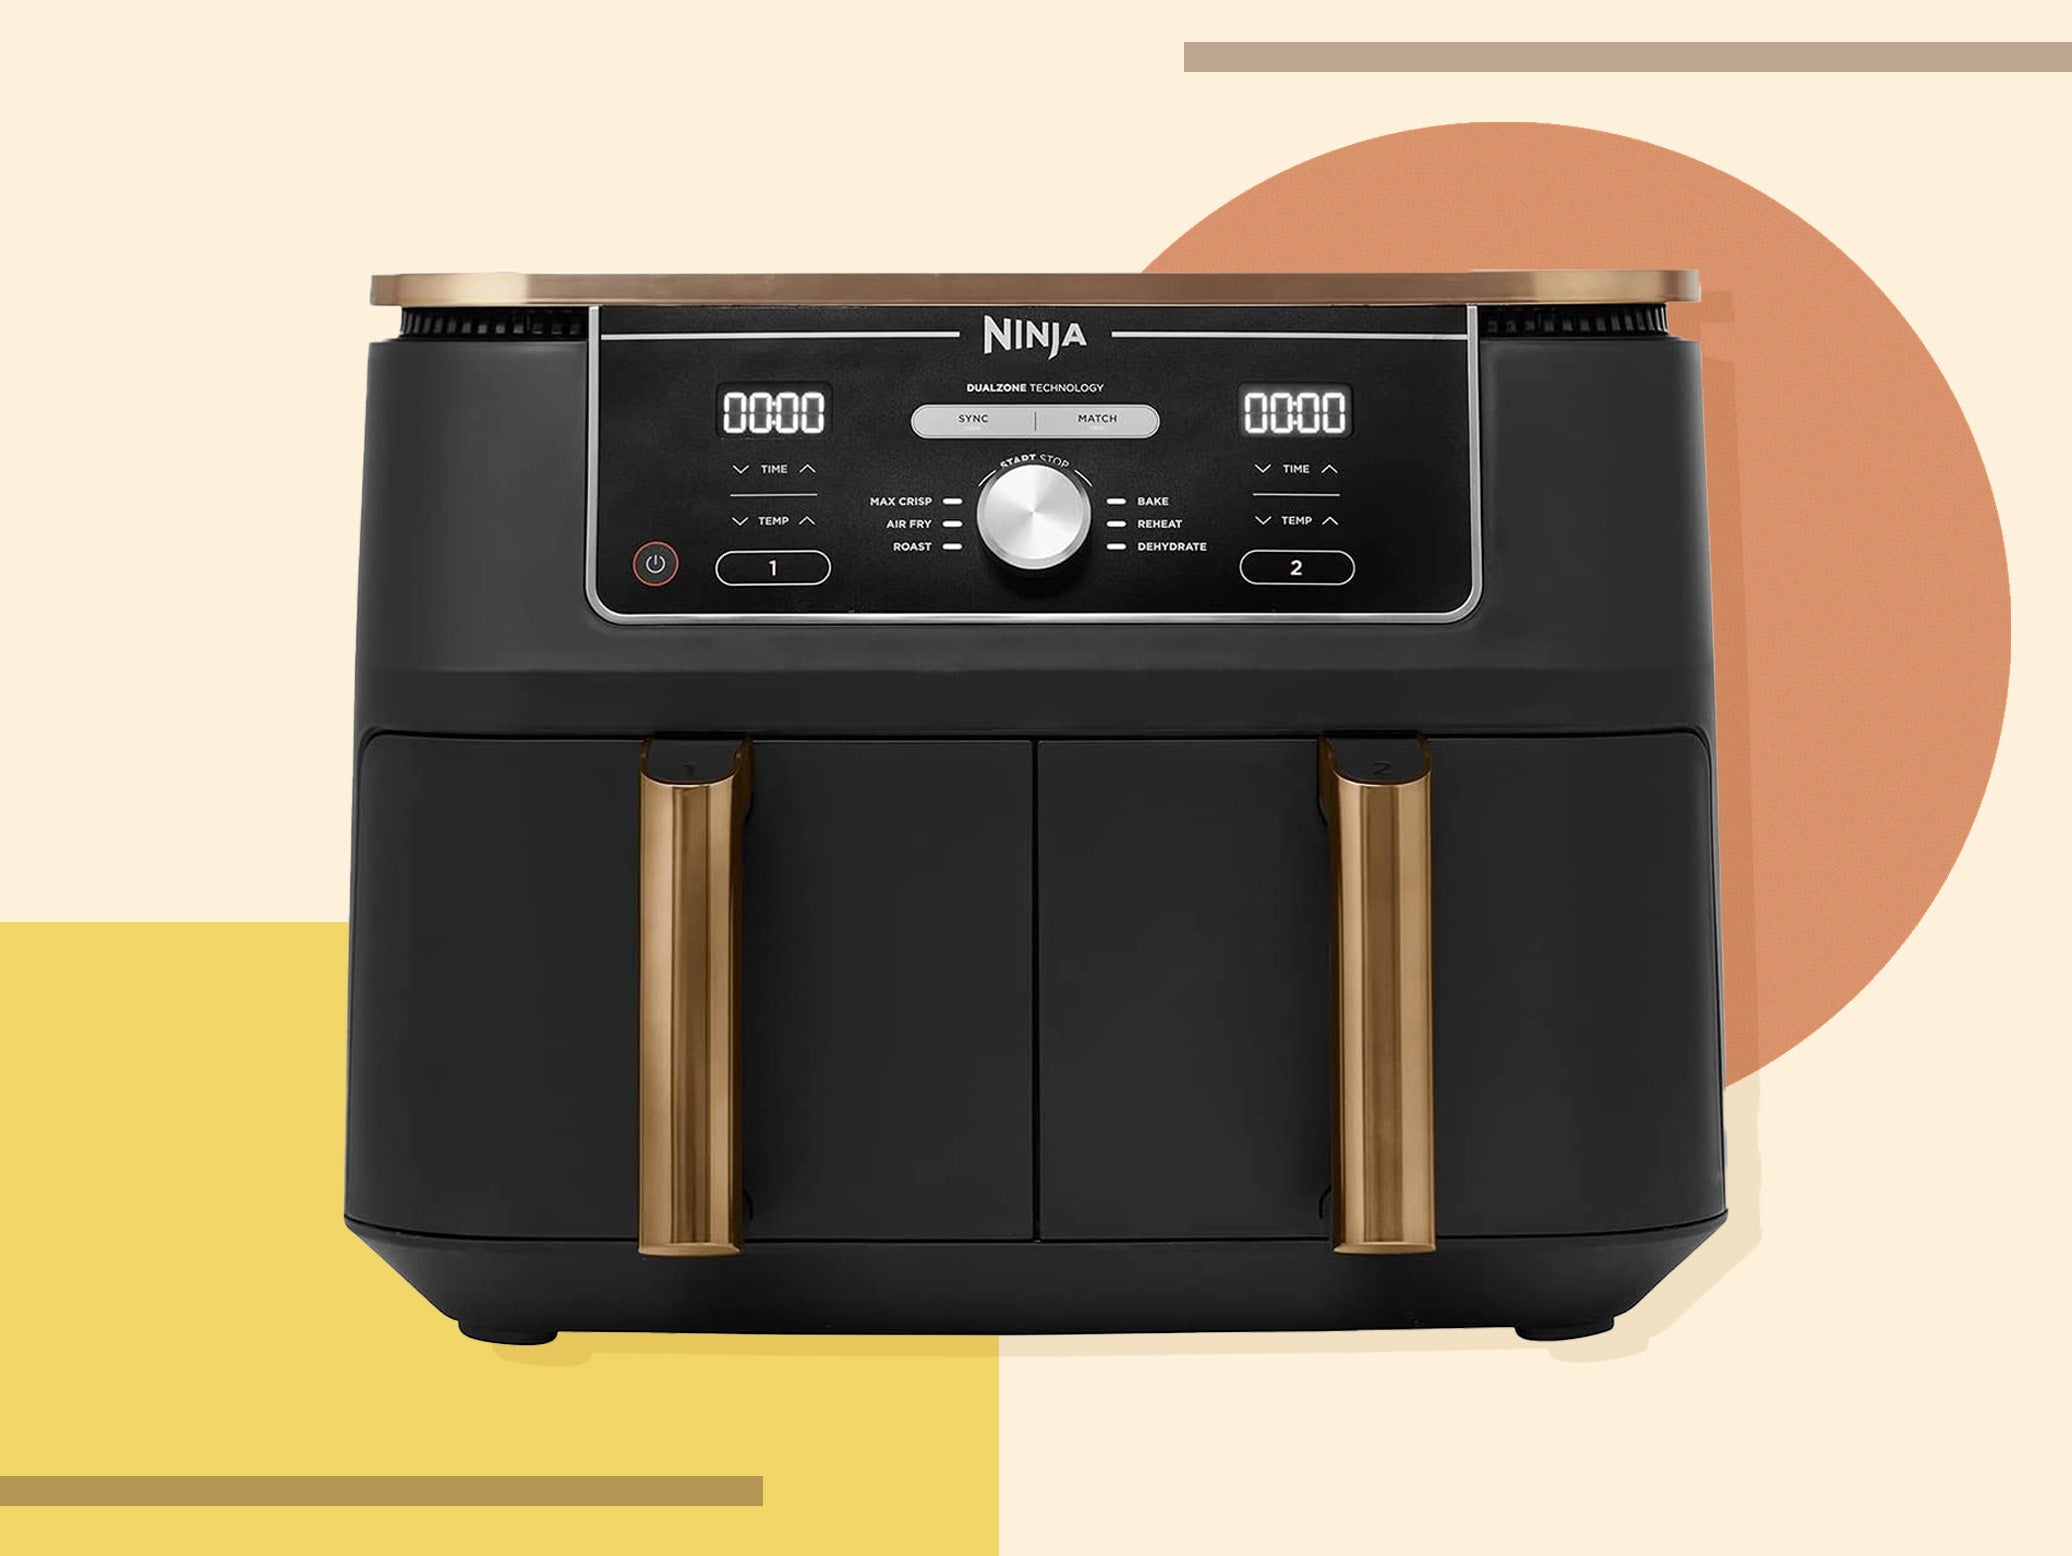 Should you buy an air fryer? I bought a Ninja Dual Zone Air Fryer, and this